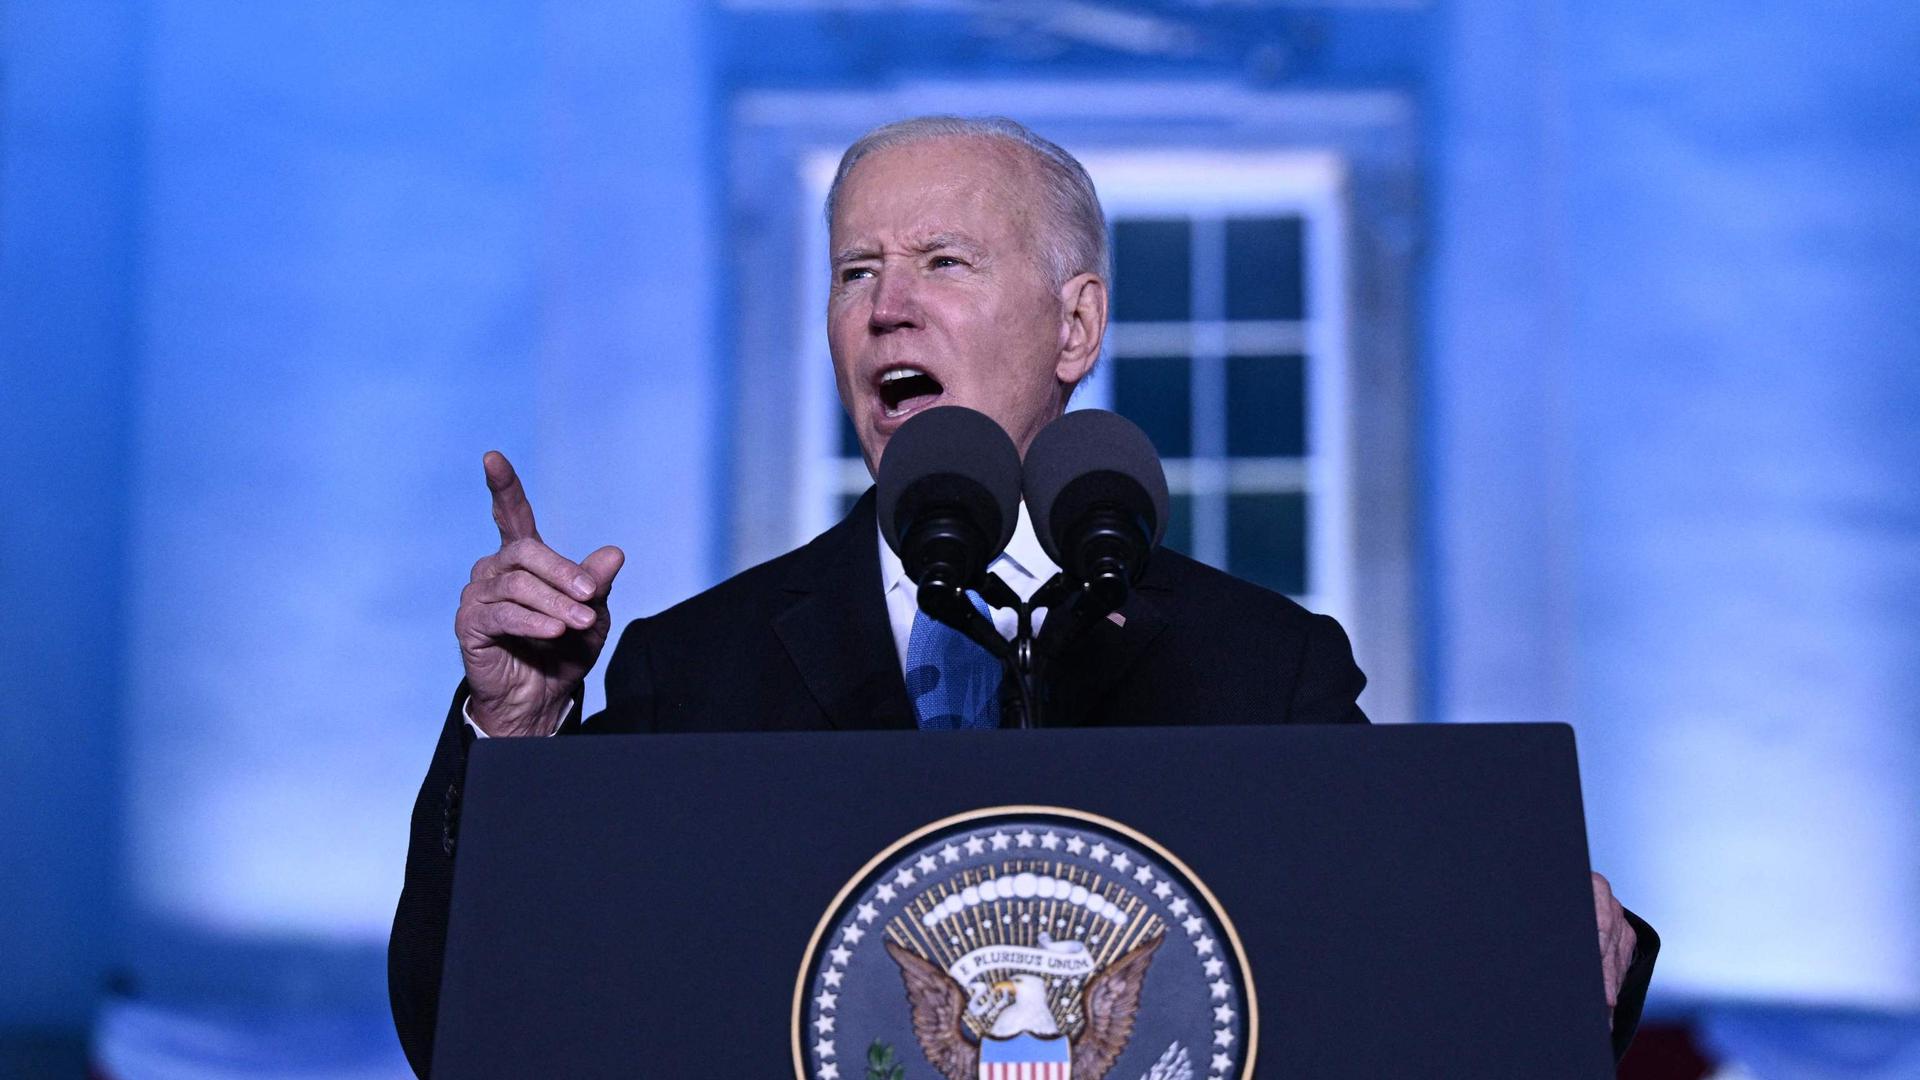 US President Joe Biden delivers a speech at the Royal Castle in Warsaw, Poland on Saturday